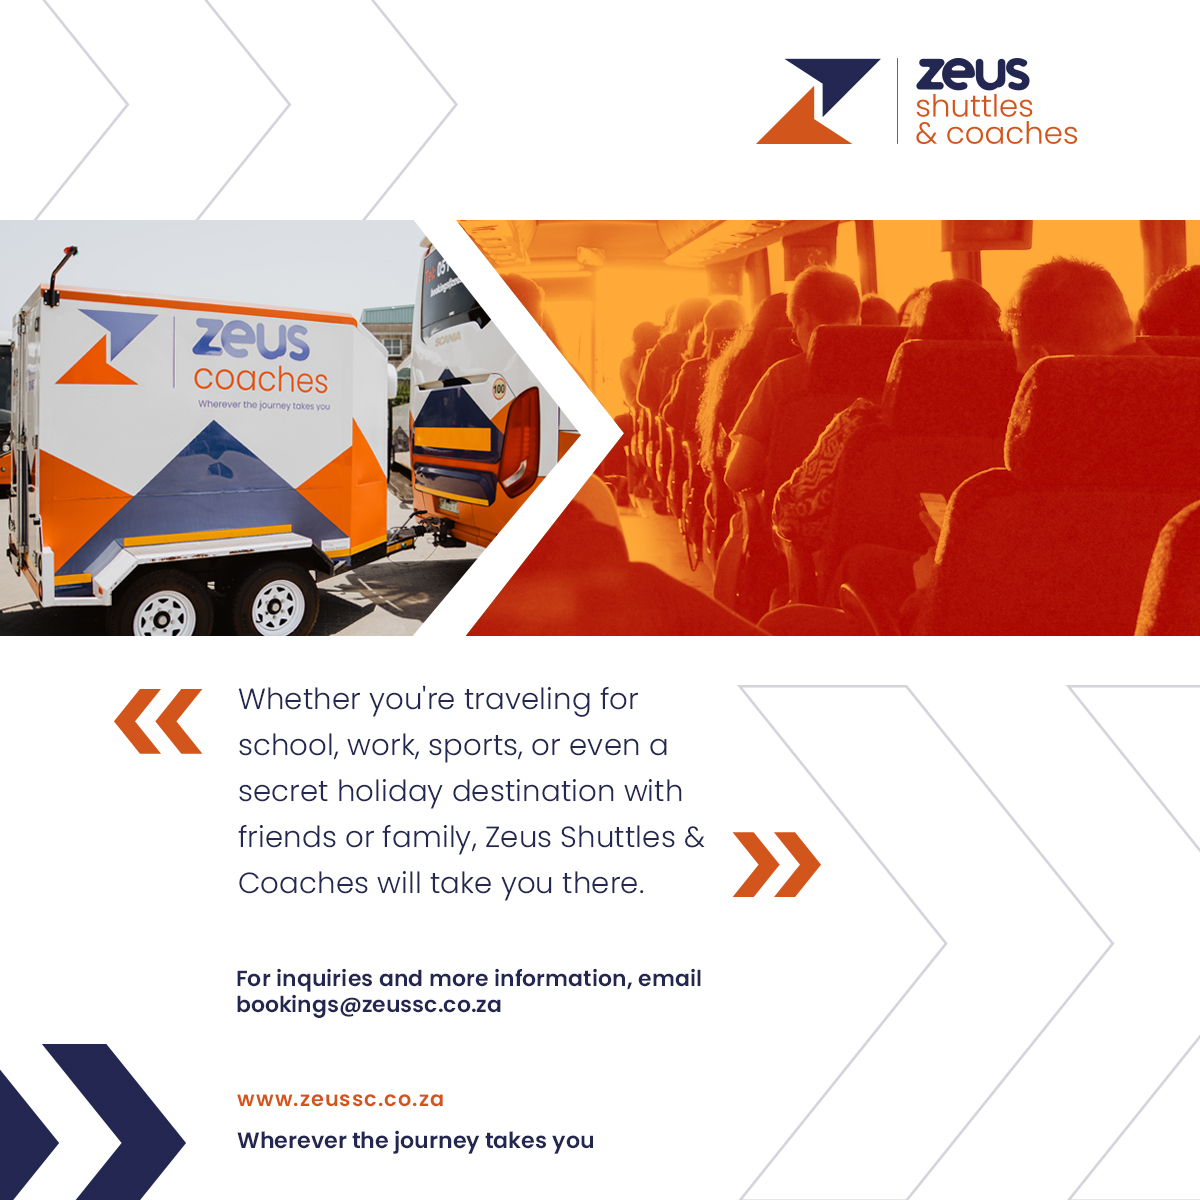 From small to big groups of travellers, choose Zeus Shuttles & Coaches for your travel needs. 
For bookings and inquiries email bookings@zeussc.co.za 

#transportation #shuttleservice #shuttlebus #travelcoach #traveling  #longdistancetravel